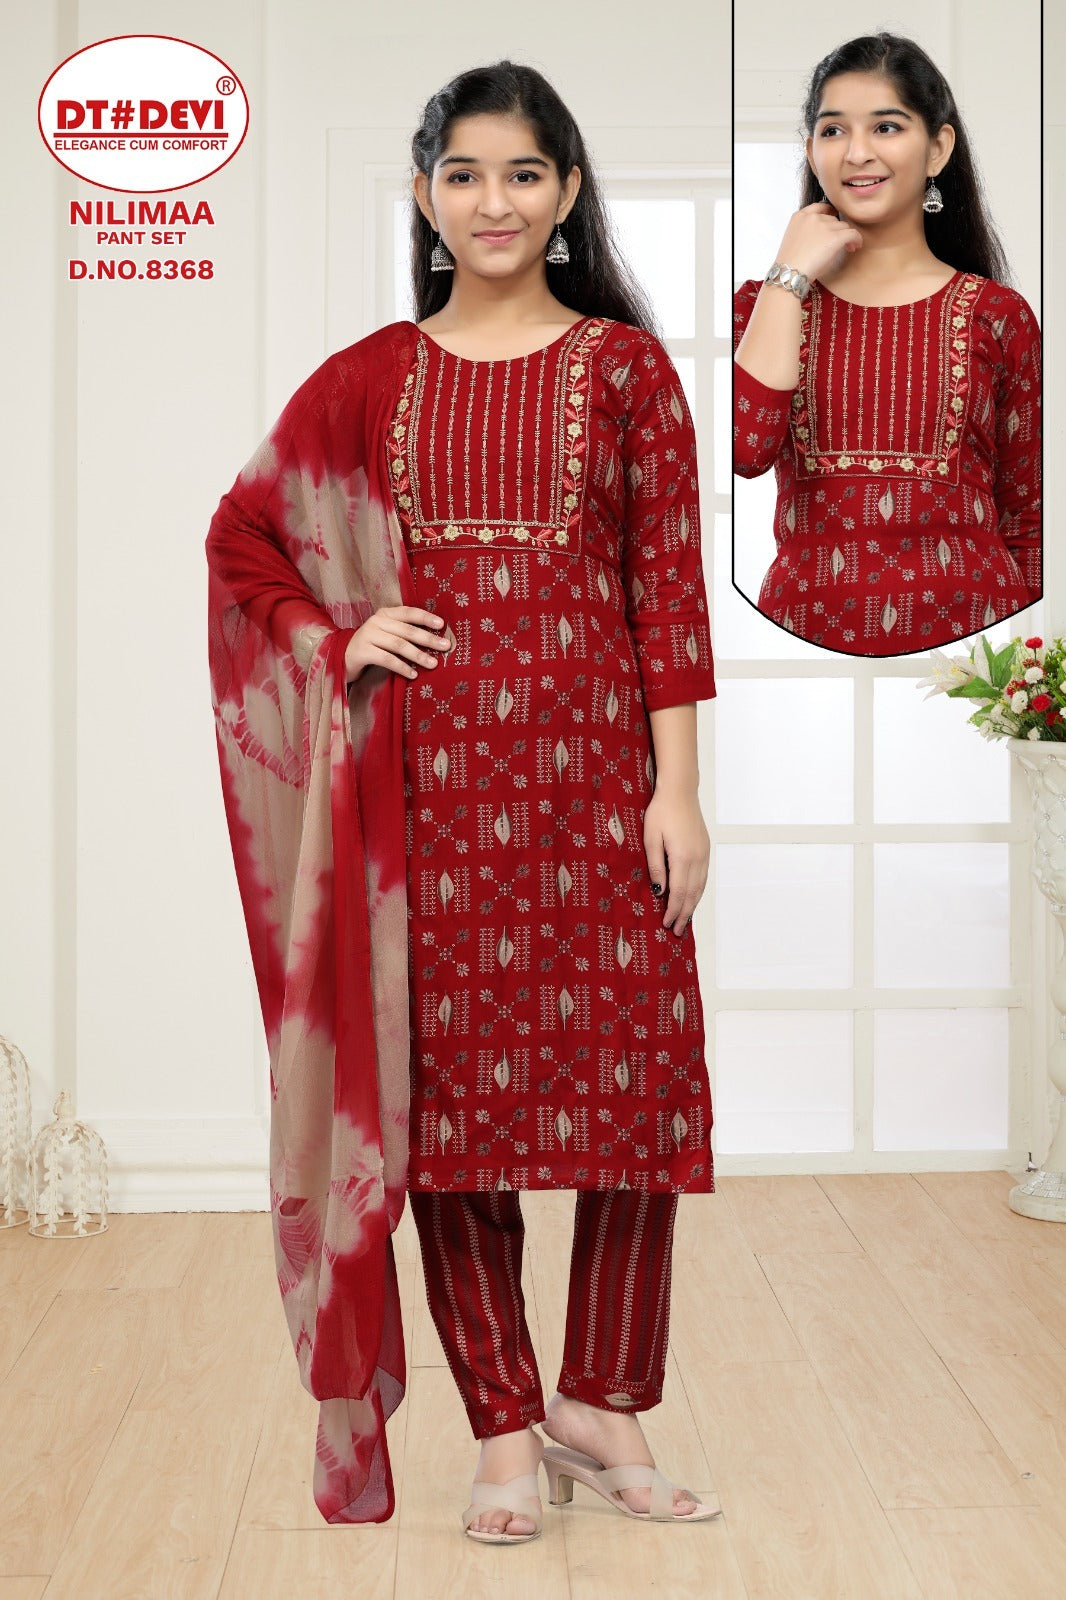 Nilimaa-8368 Dt Devi Rayon Girls Readymade Pant Suits